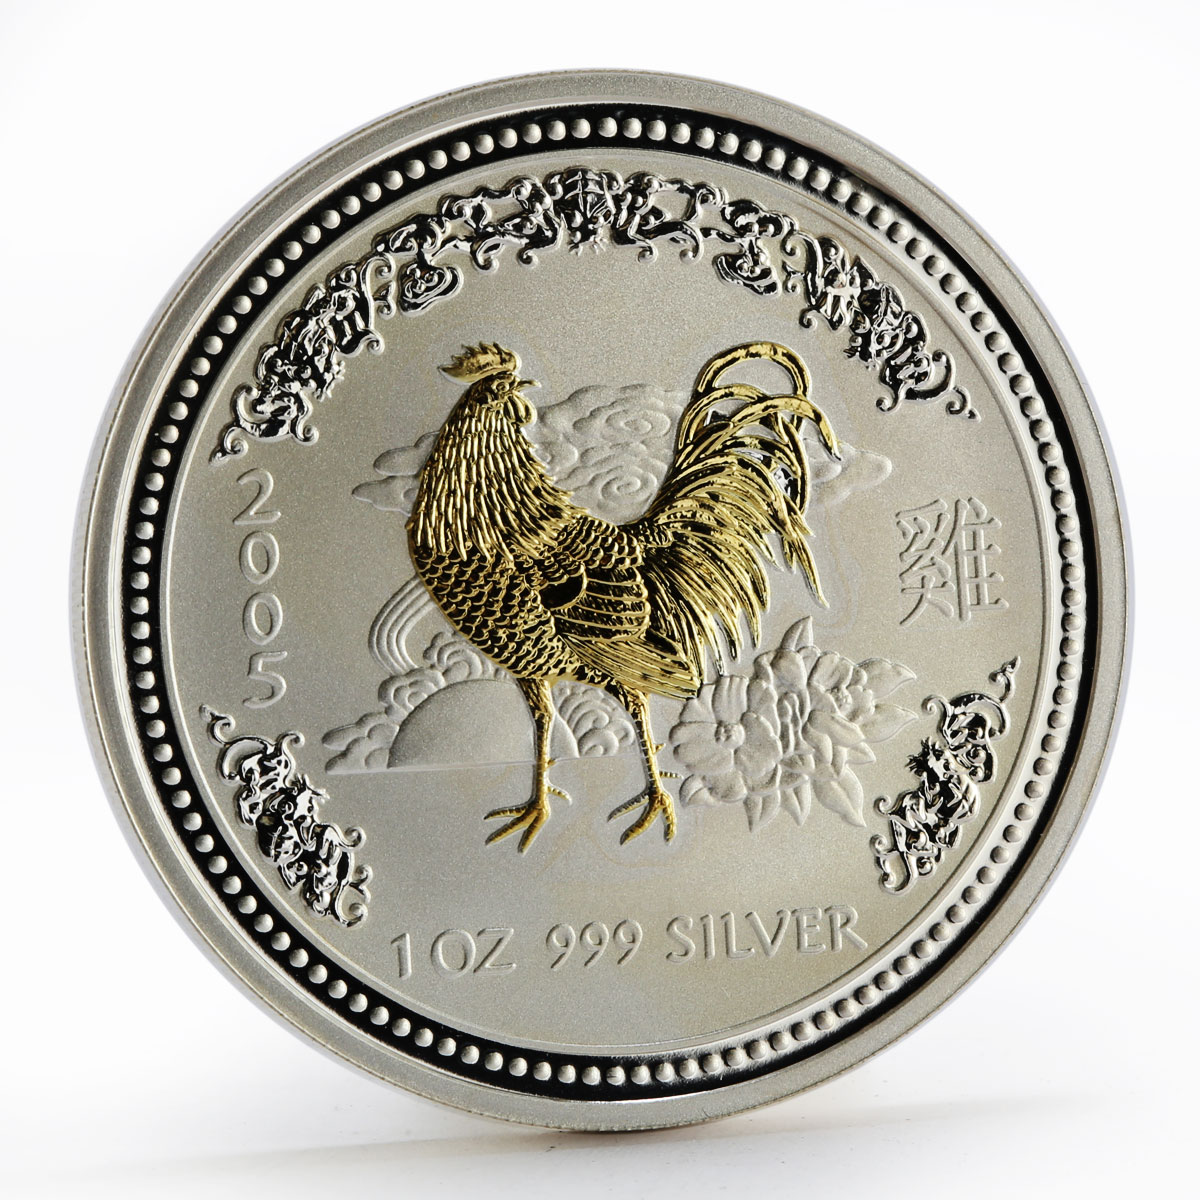 Australia 1 dollar Year of the Rooster Lunar Series I Gilded Silver 1 Oz 2005